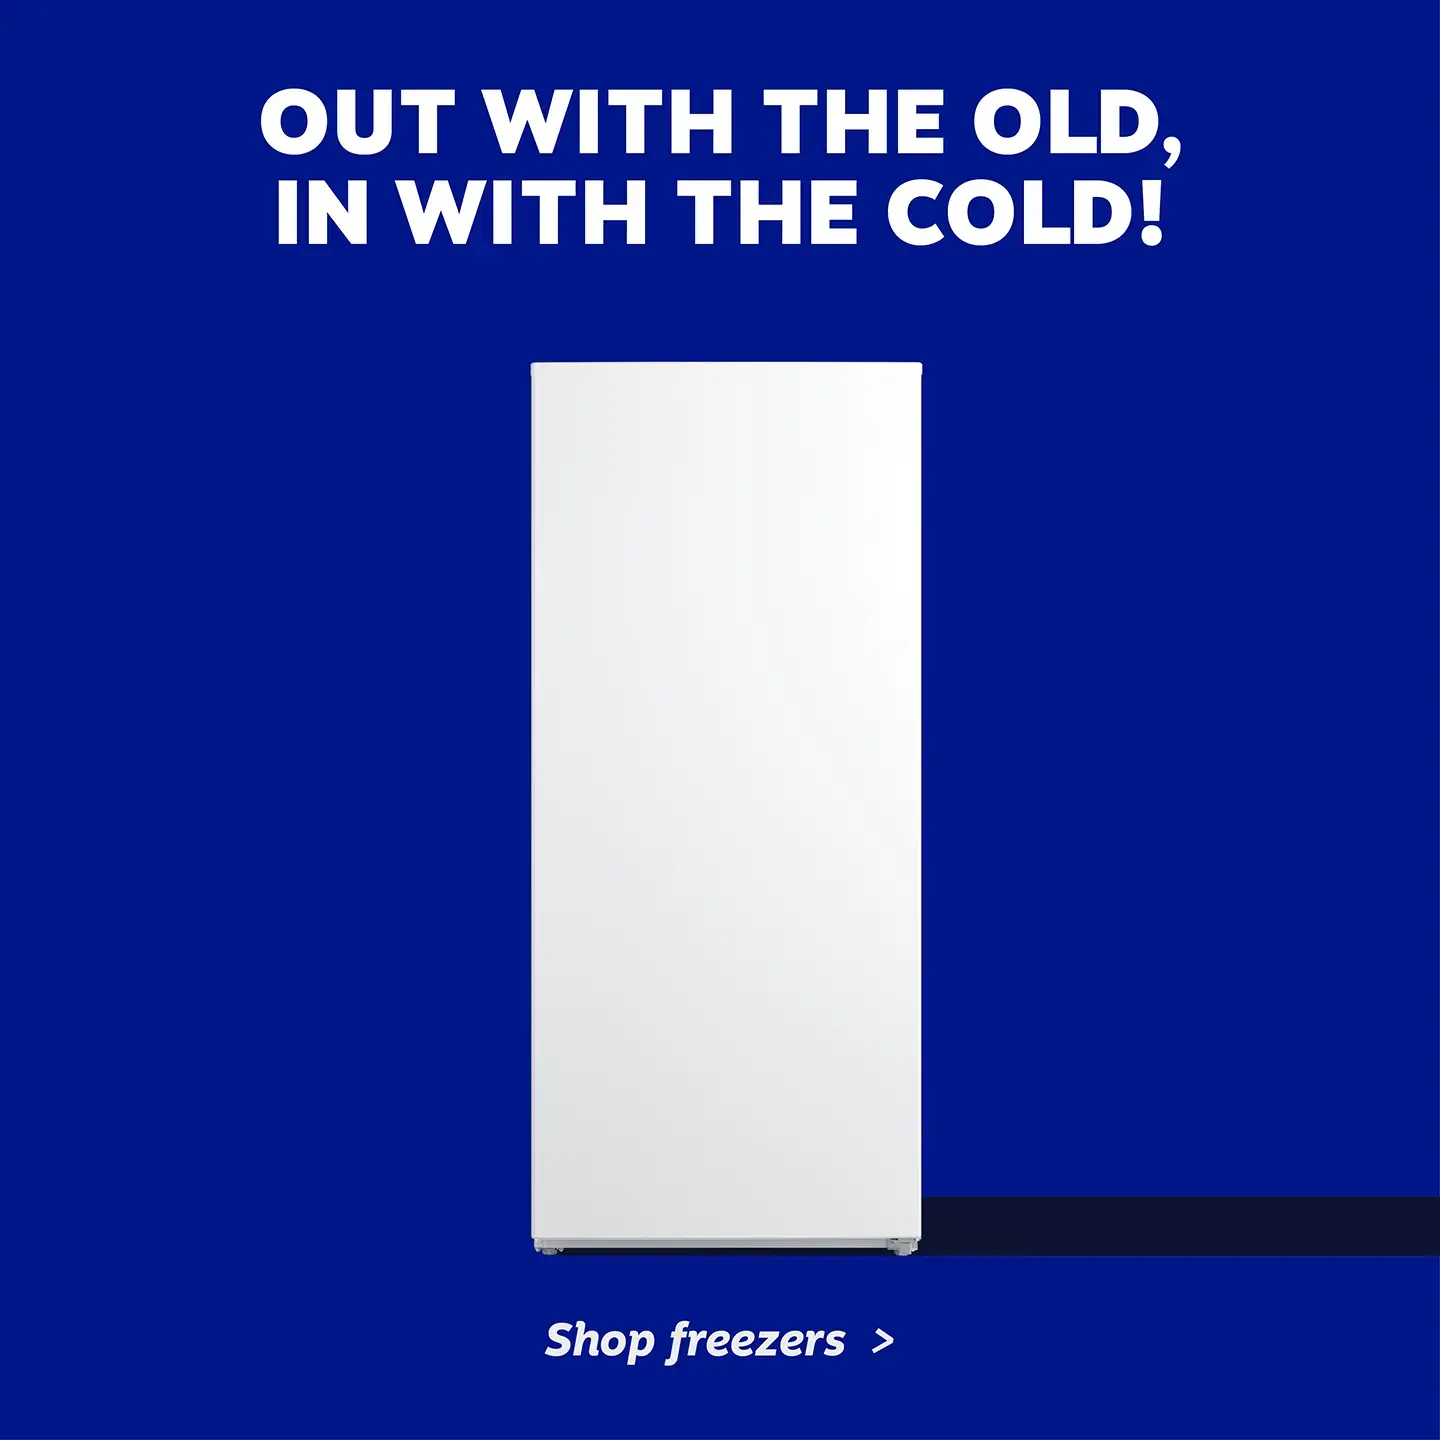 Out with the old, in with the cold! Shop freezers